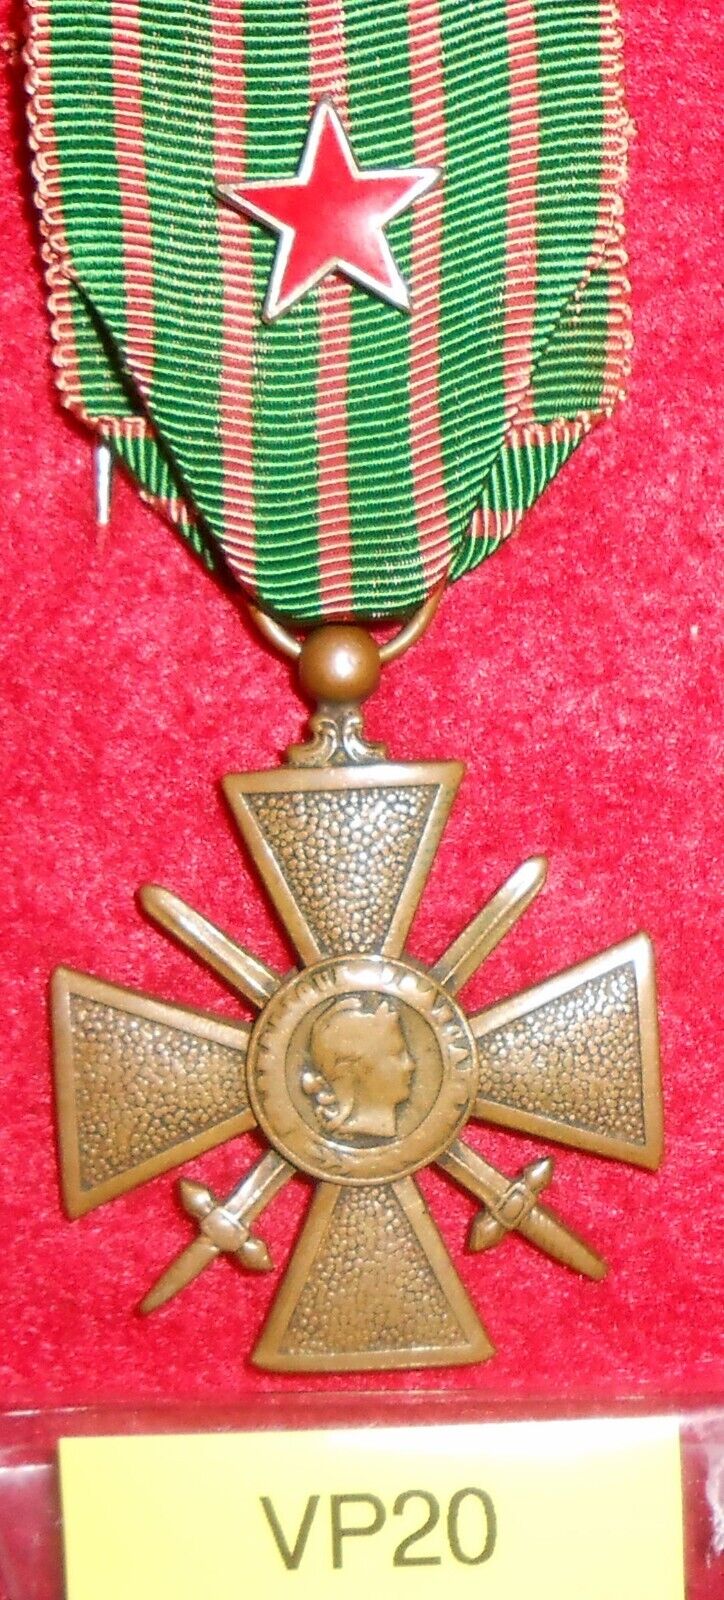 VP20 French Croix de Guerre with wound star on it date 1918